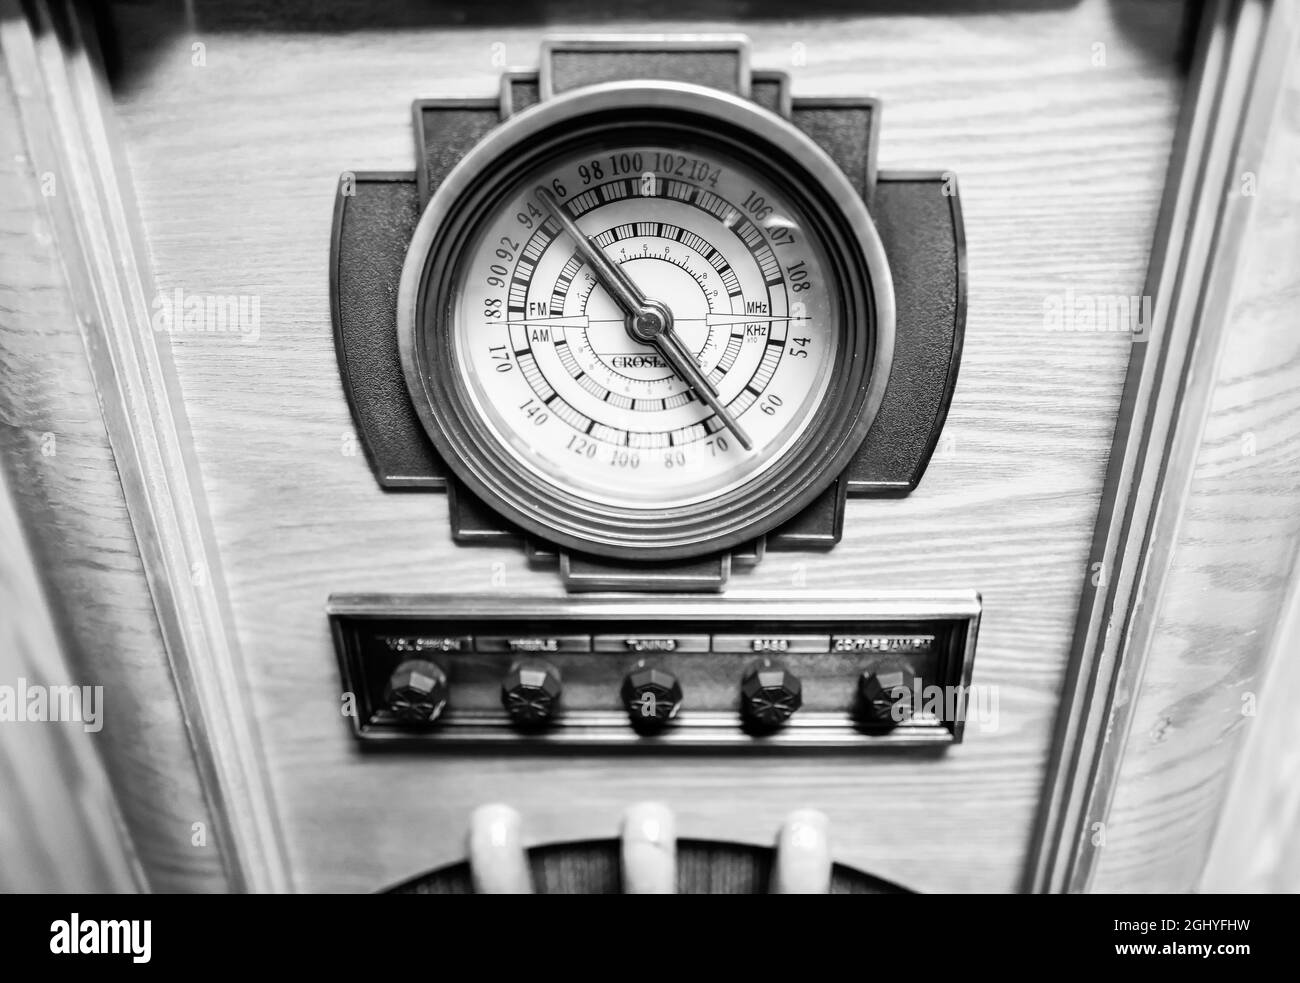 wooden vintage radio dials and face Stock Photo